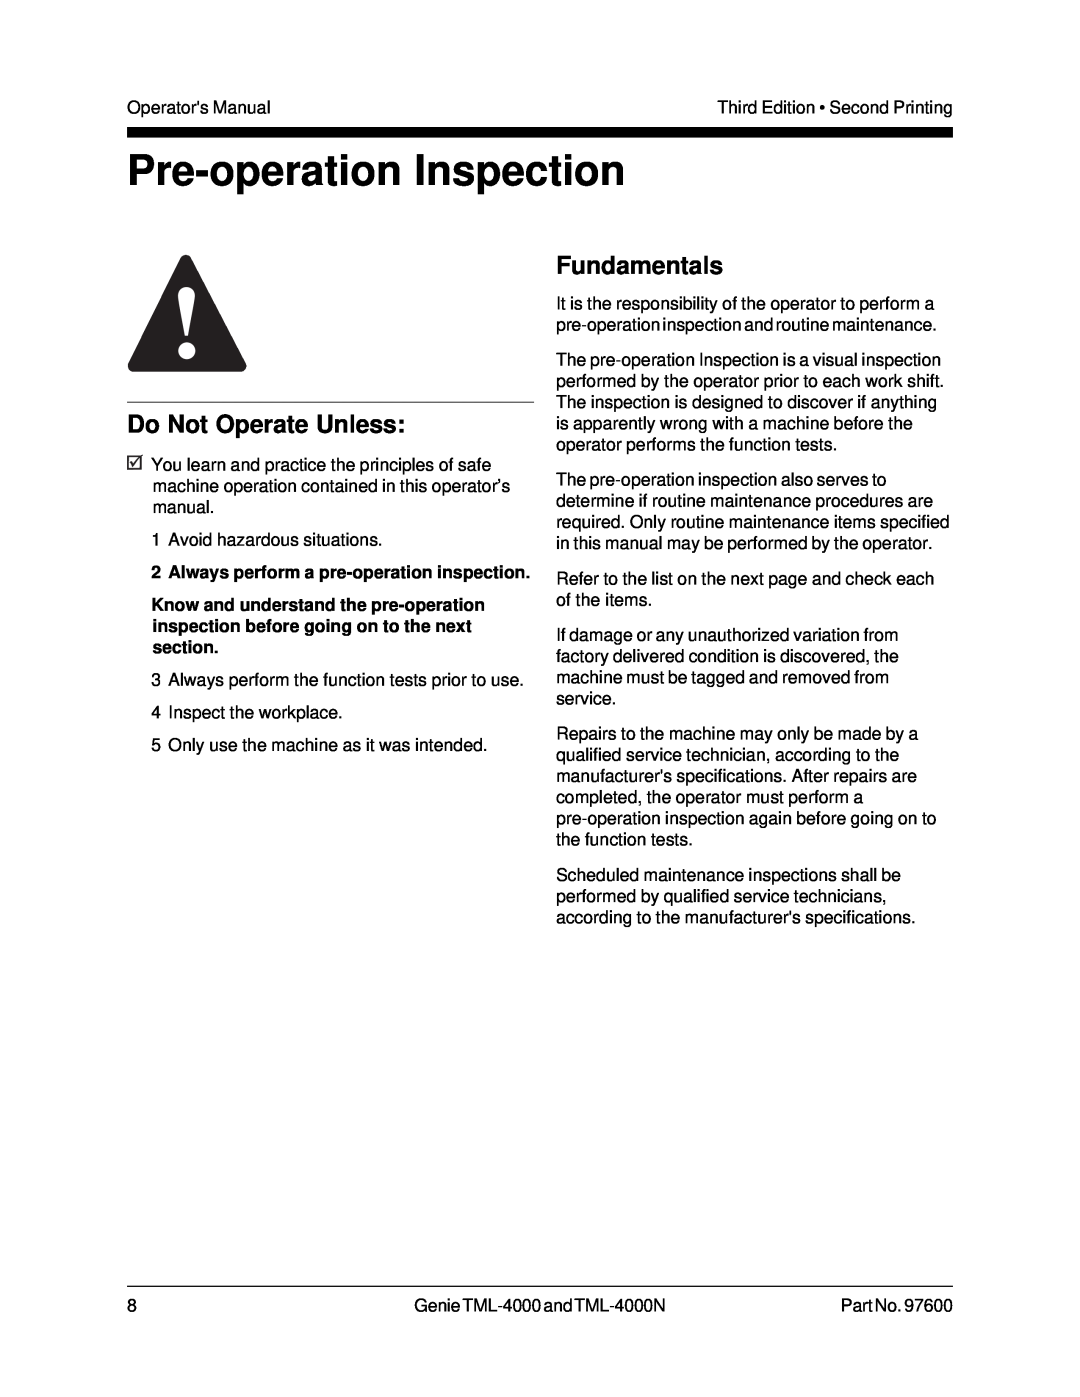 Genie TML-4000 Pre-operation Inspection, Fundamentals, Always perform a pre-operation inspection, Do Not Operate Unless 